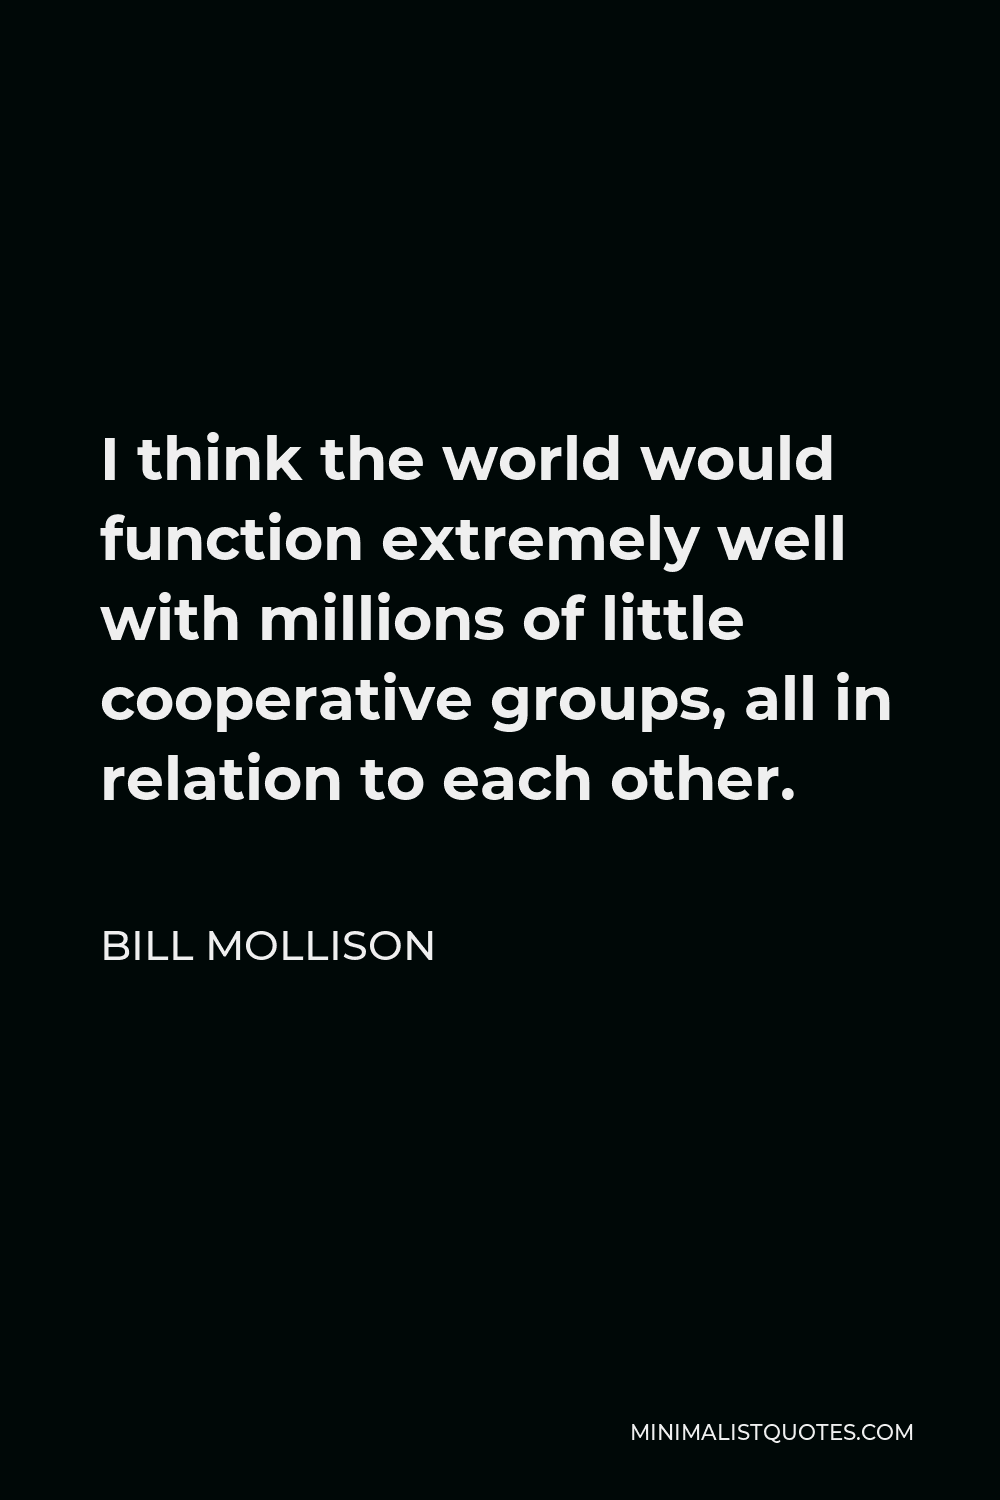 Bill Mollison Quote - I think the world would function extremely well with millions of little cooperative groups, all in relation to each other.